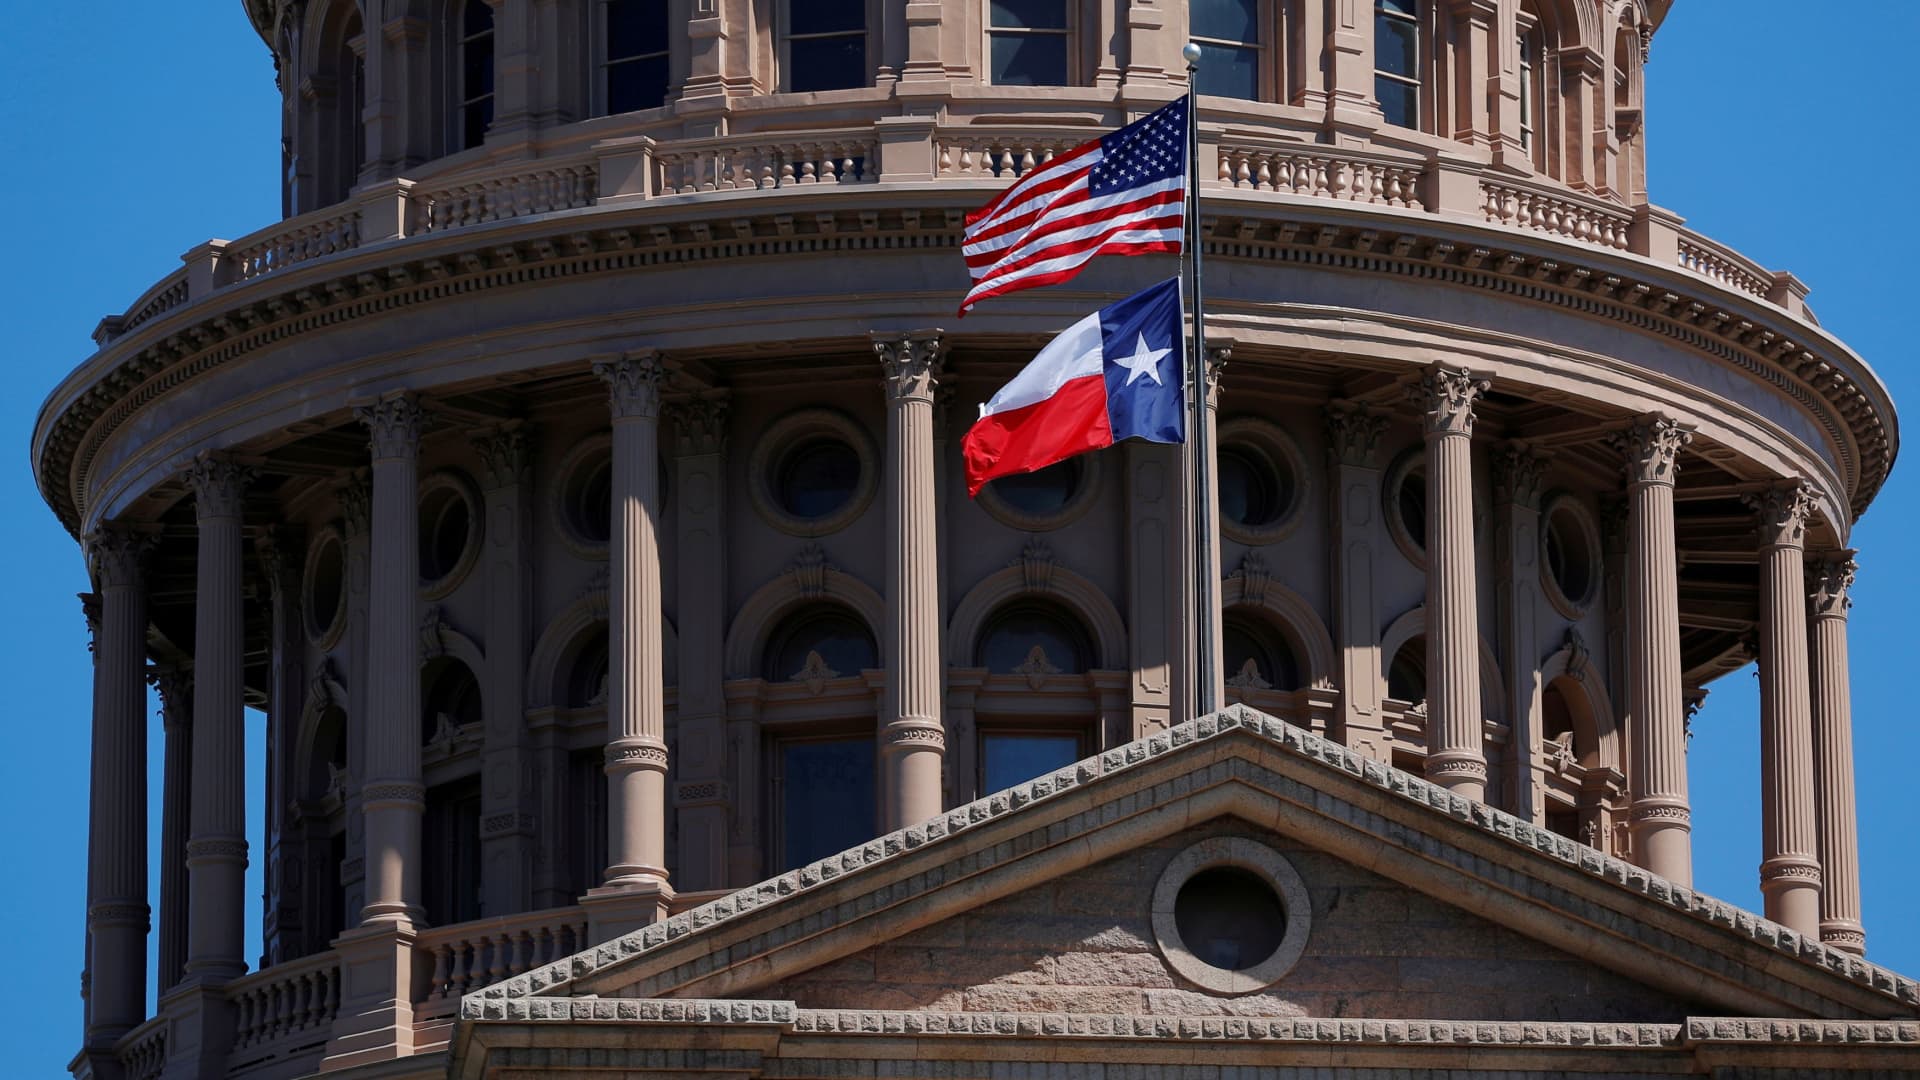 The American flag and the Texas State flag fly over the Texas State Capitol in Austin, Texas.